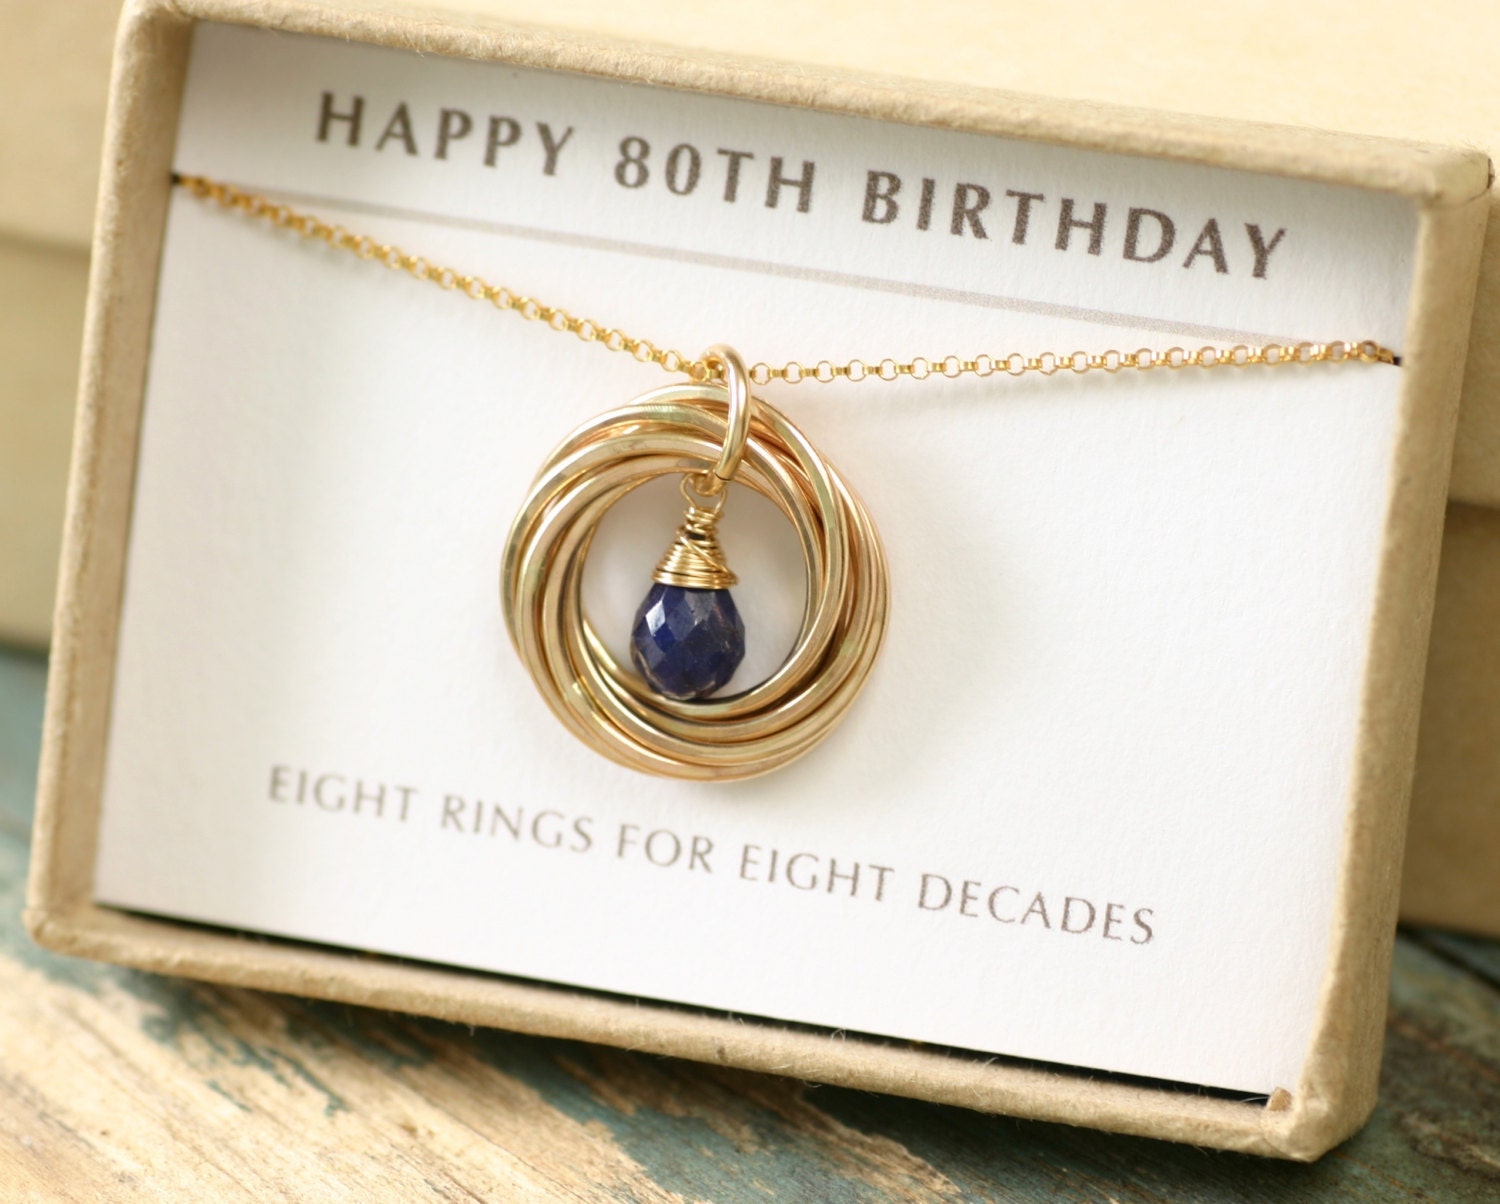 80th birthday gift for mother sapphire necklace mom